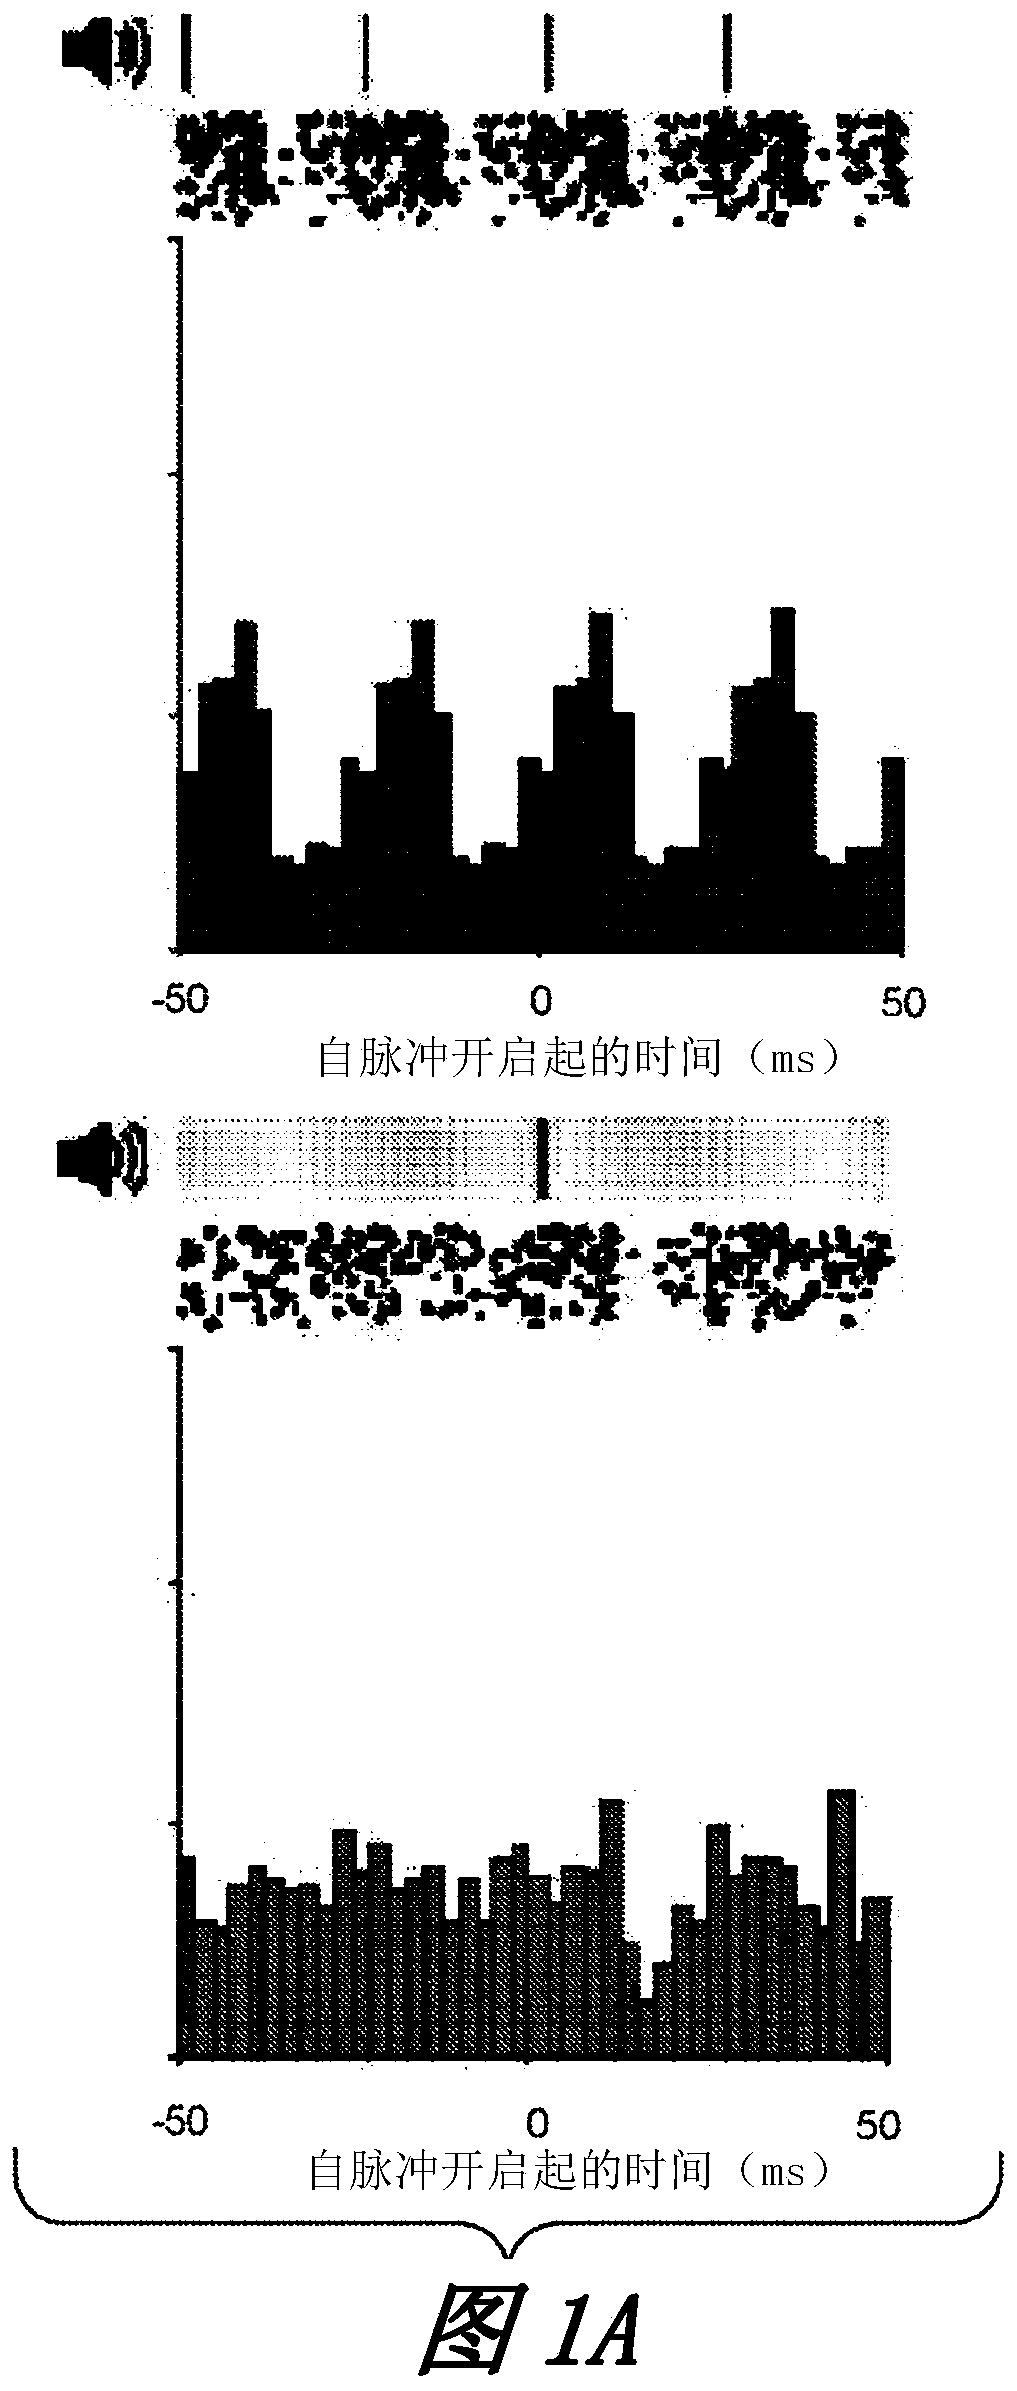 Systems and methods for preventing, mitigating, and/or treating dementia